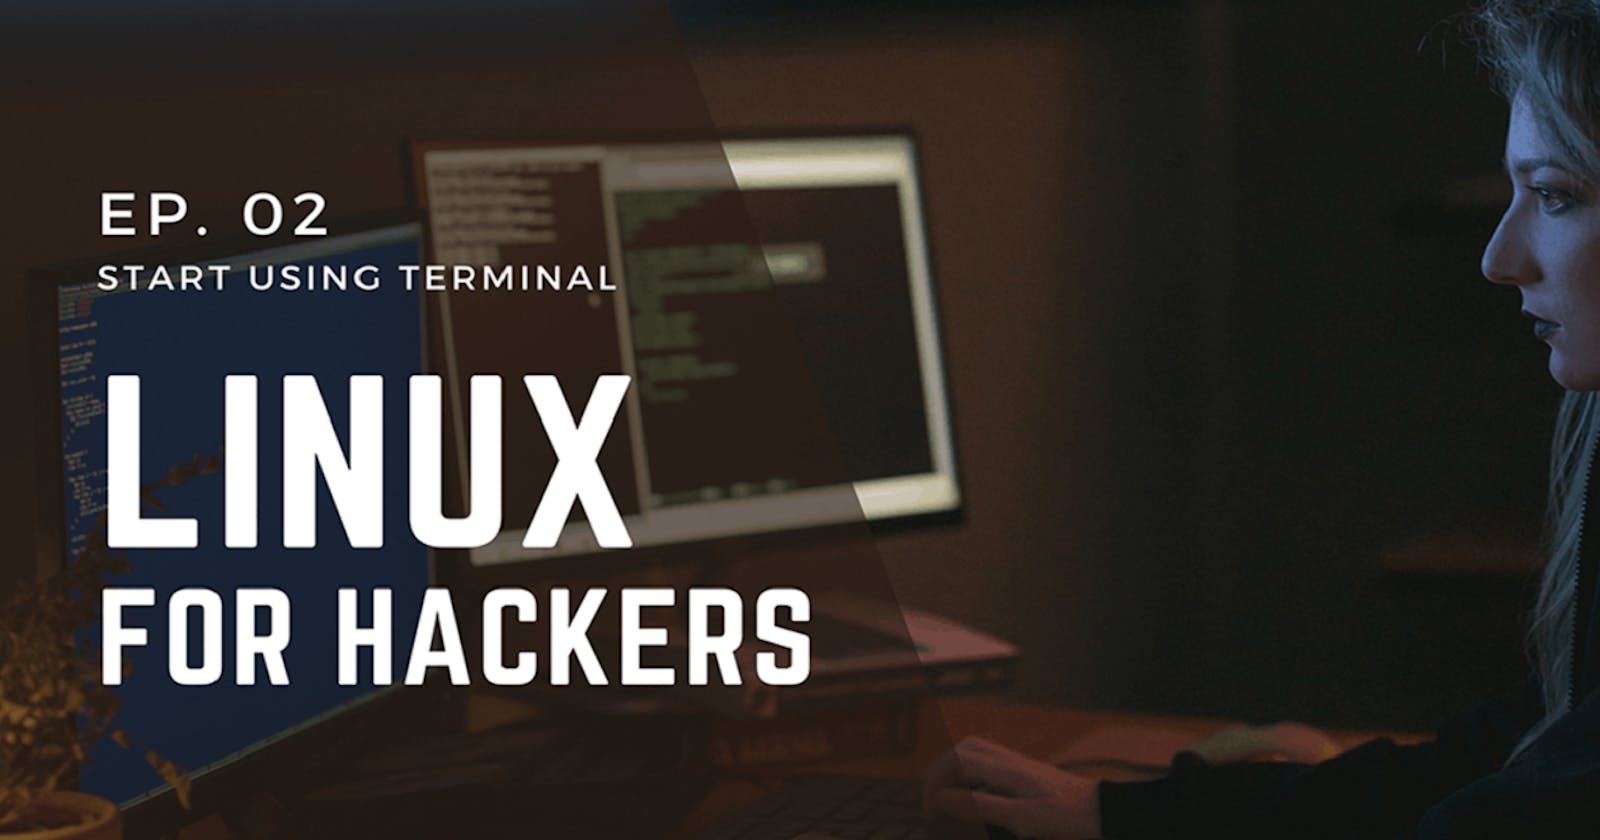 Linux for Hackers EP02 | Start Using Terminal